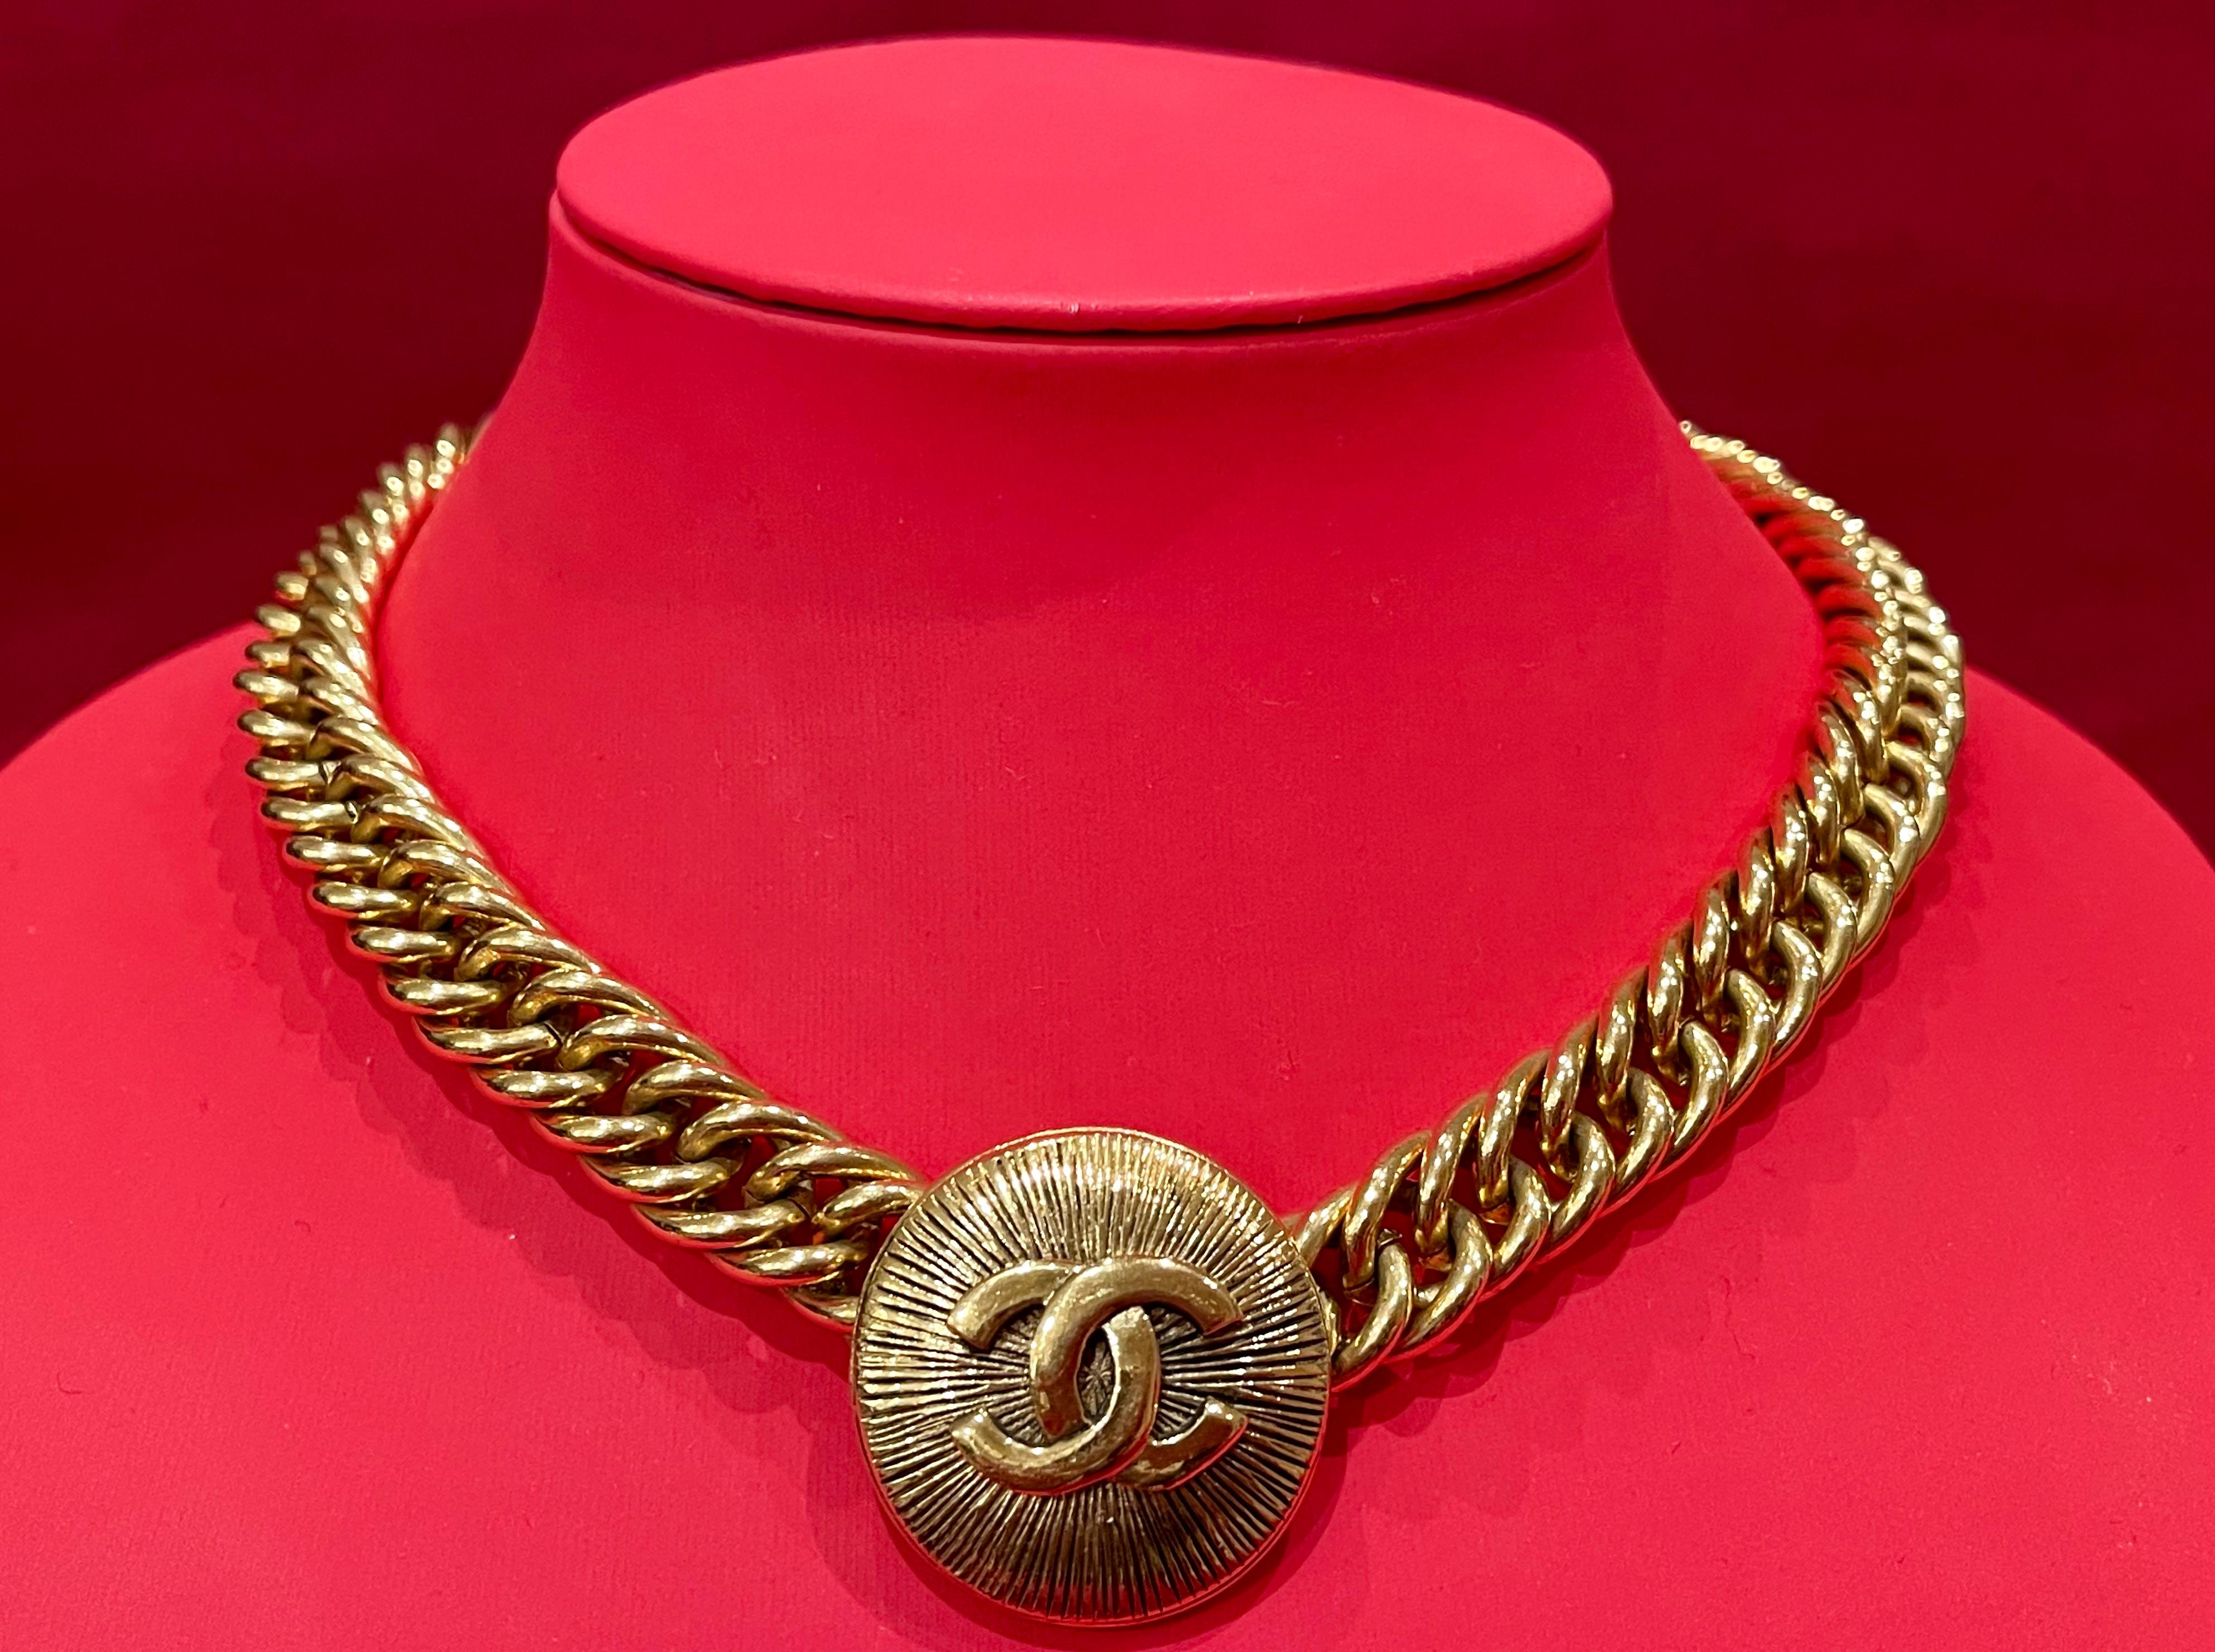 Lovely authenticité CHANEL choker necklace in gold plated in very good condition. Chain links with round CC pendant.